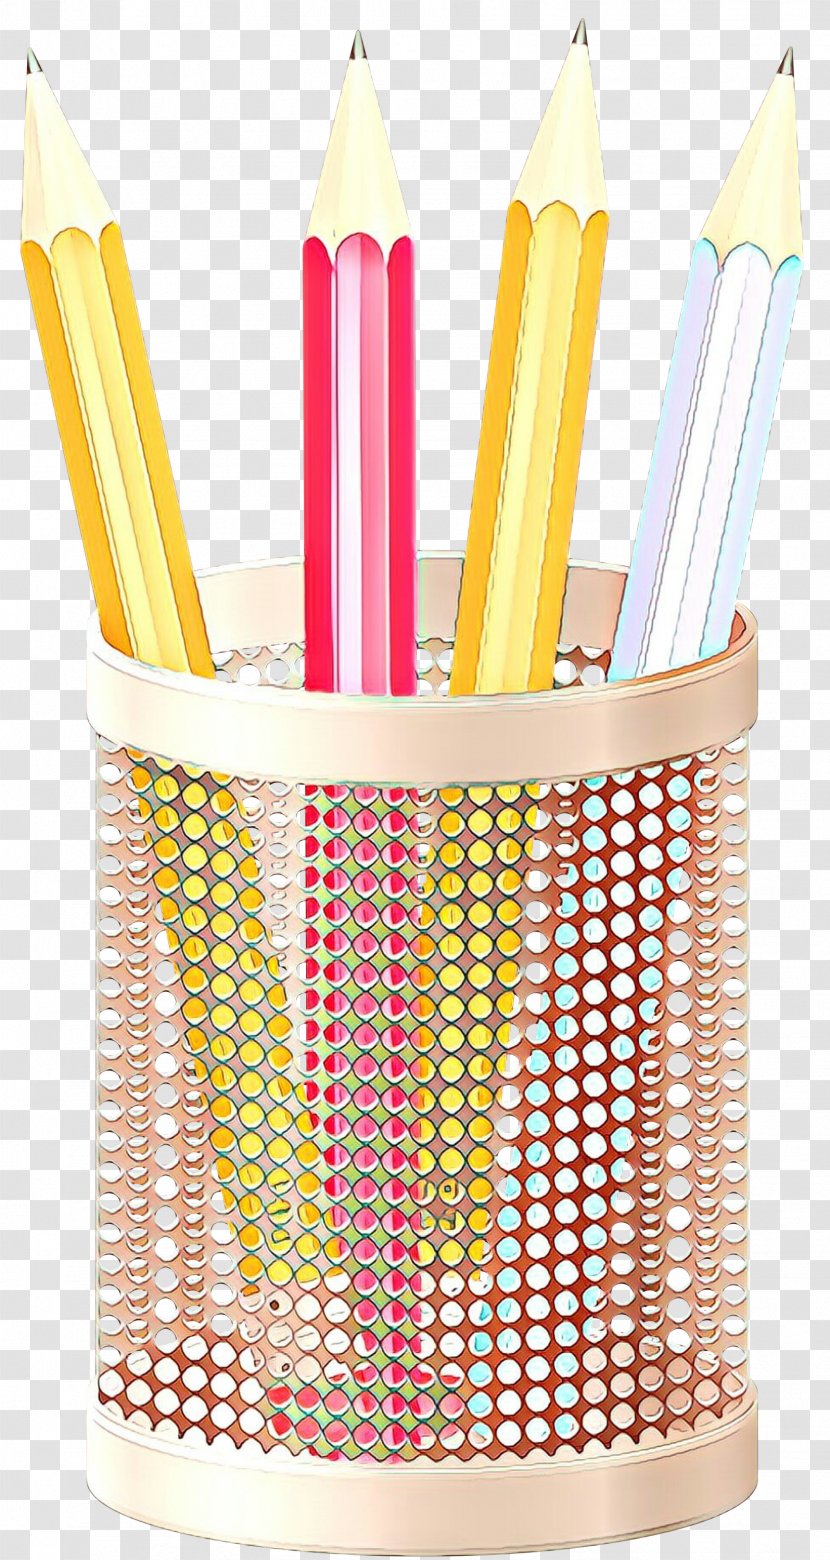 Drinking Straw Pencil Writing Implement Office Supplies Transparent PNG